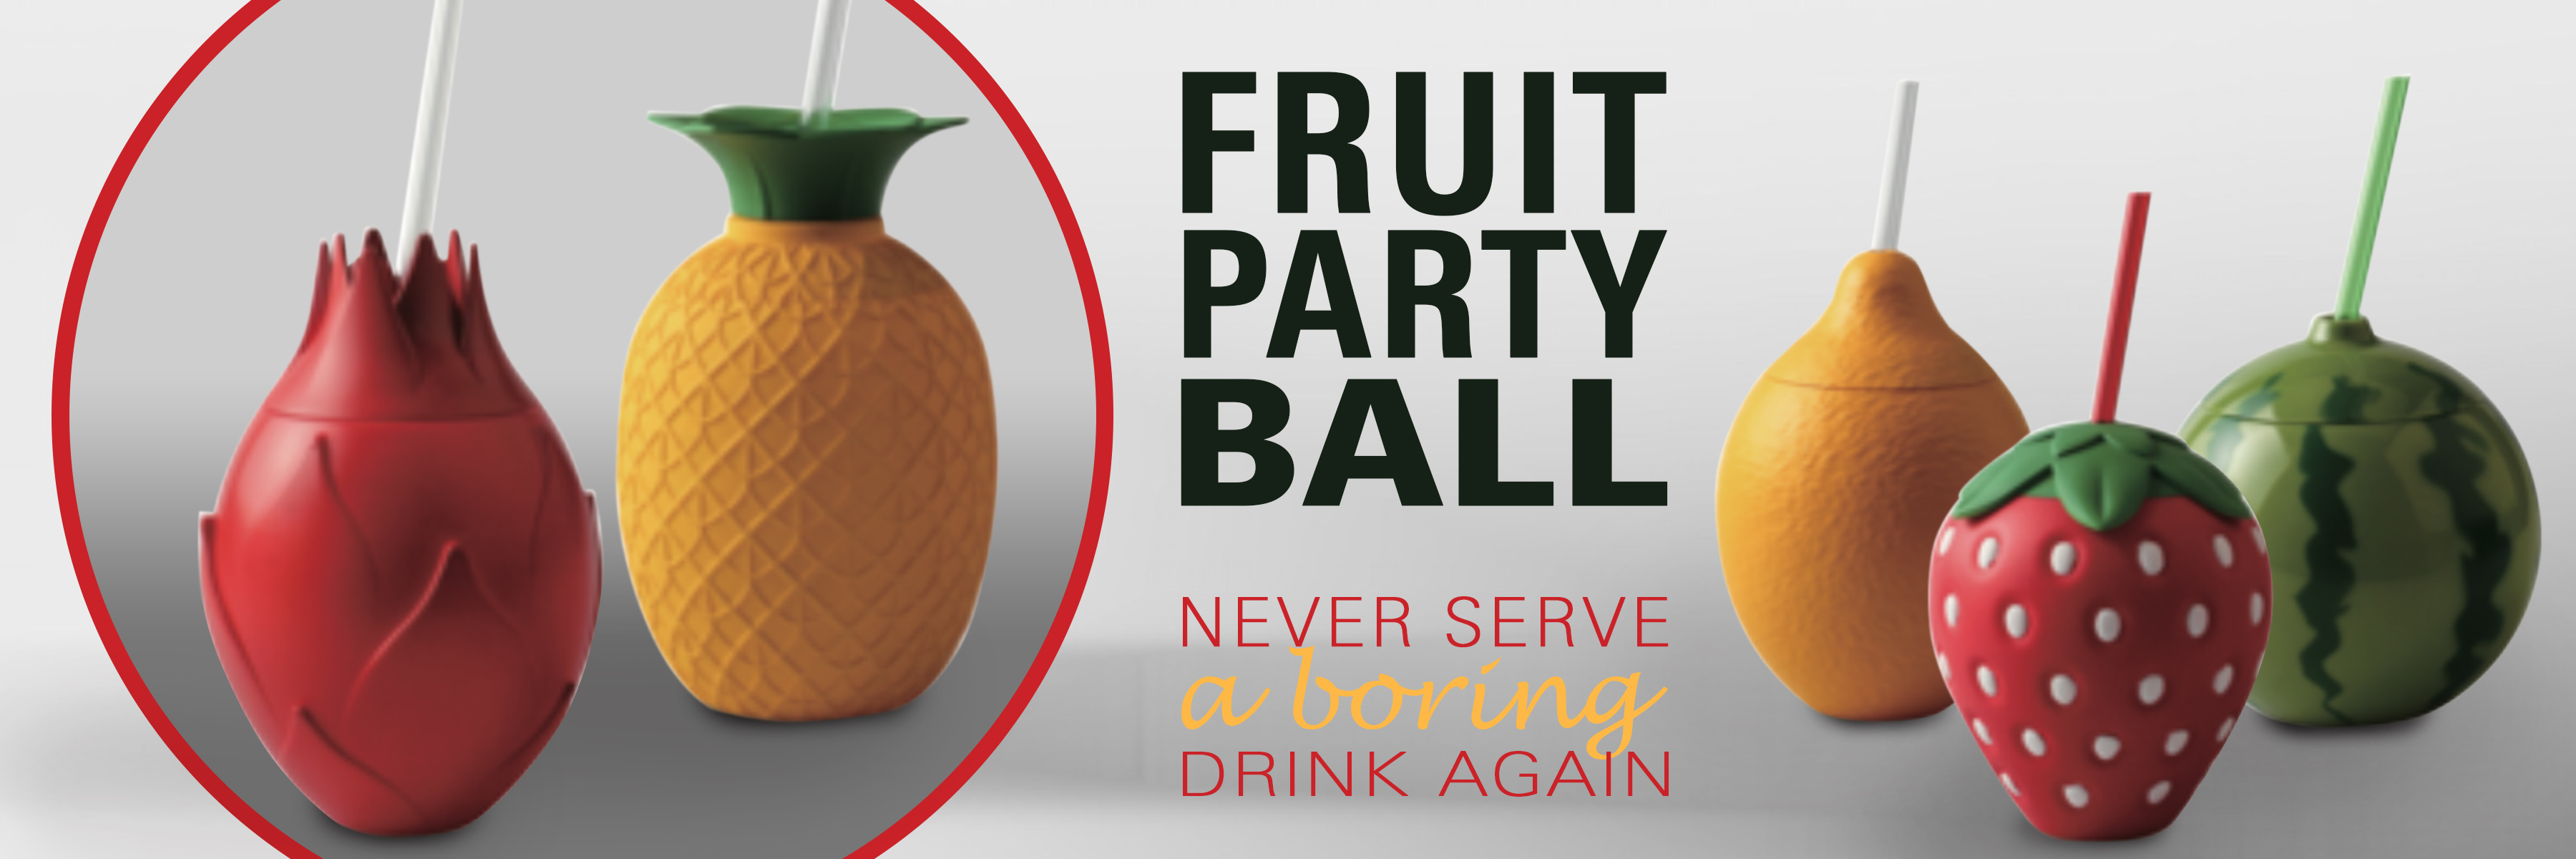 fruit party ball